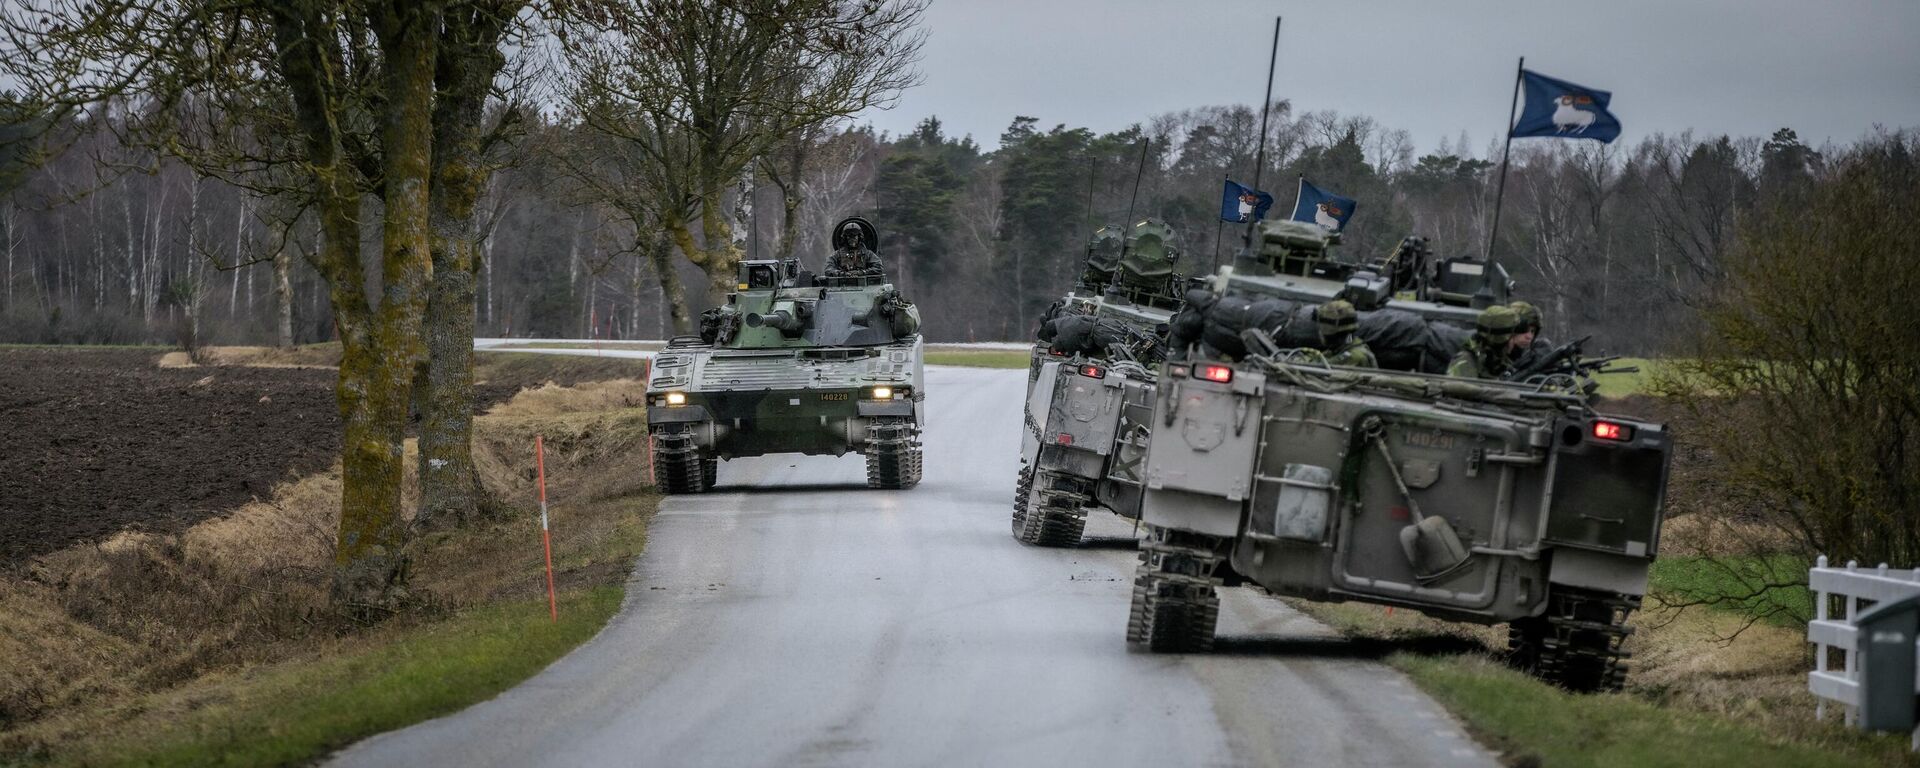 Gotland's Regiment patrols in tanks on the roads in nothern Gotland on January 16, 2022. - Sweden deployed armoured combat vehicles and armed soldiers to patrol streets on the island of Gotland in response to increased Russian activity in the region. (Photo by Karl MELANDER / various sources / AFP) /  - Sputnik International, 1920, 29.04.2022